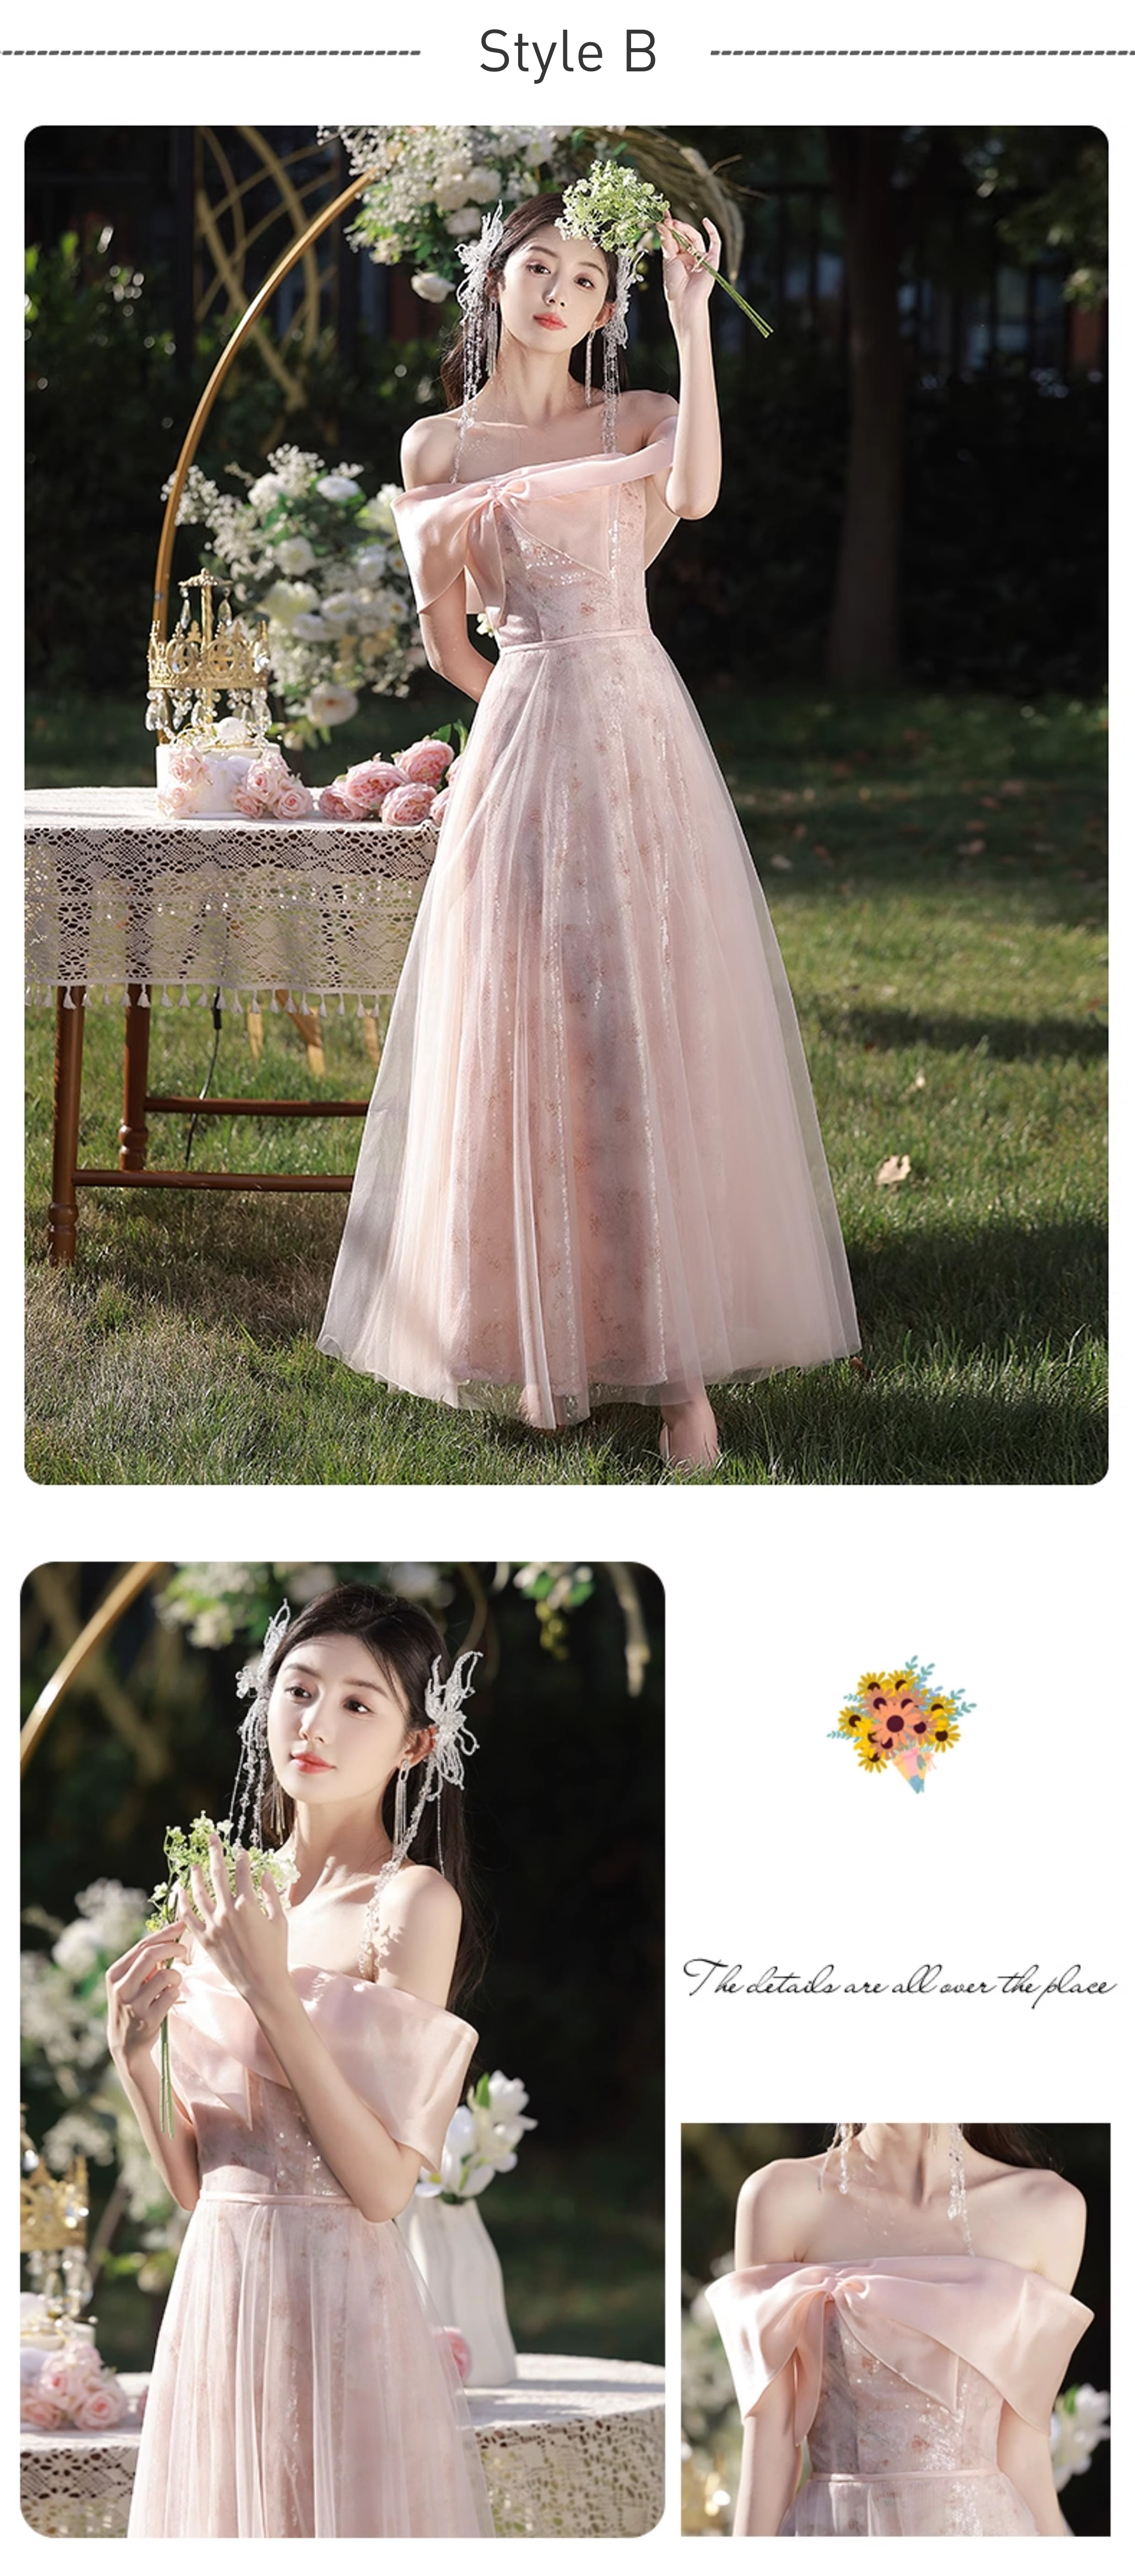 Classy-Pink-Tulle-Floral-Evening-Party-Cocktail-Prom-Bridesmaid-Maxi-Dress18